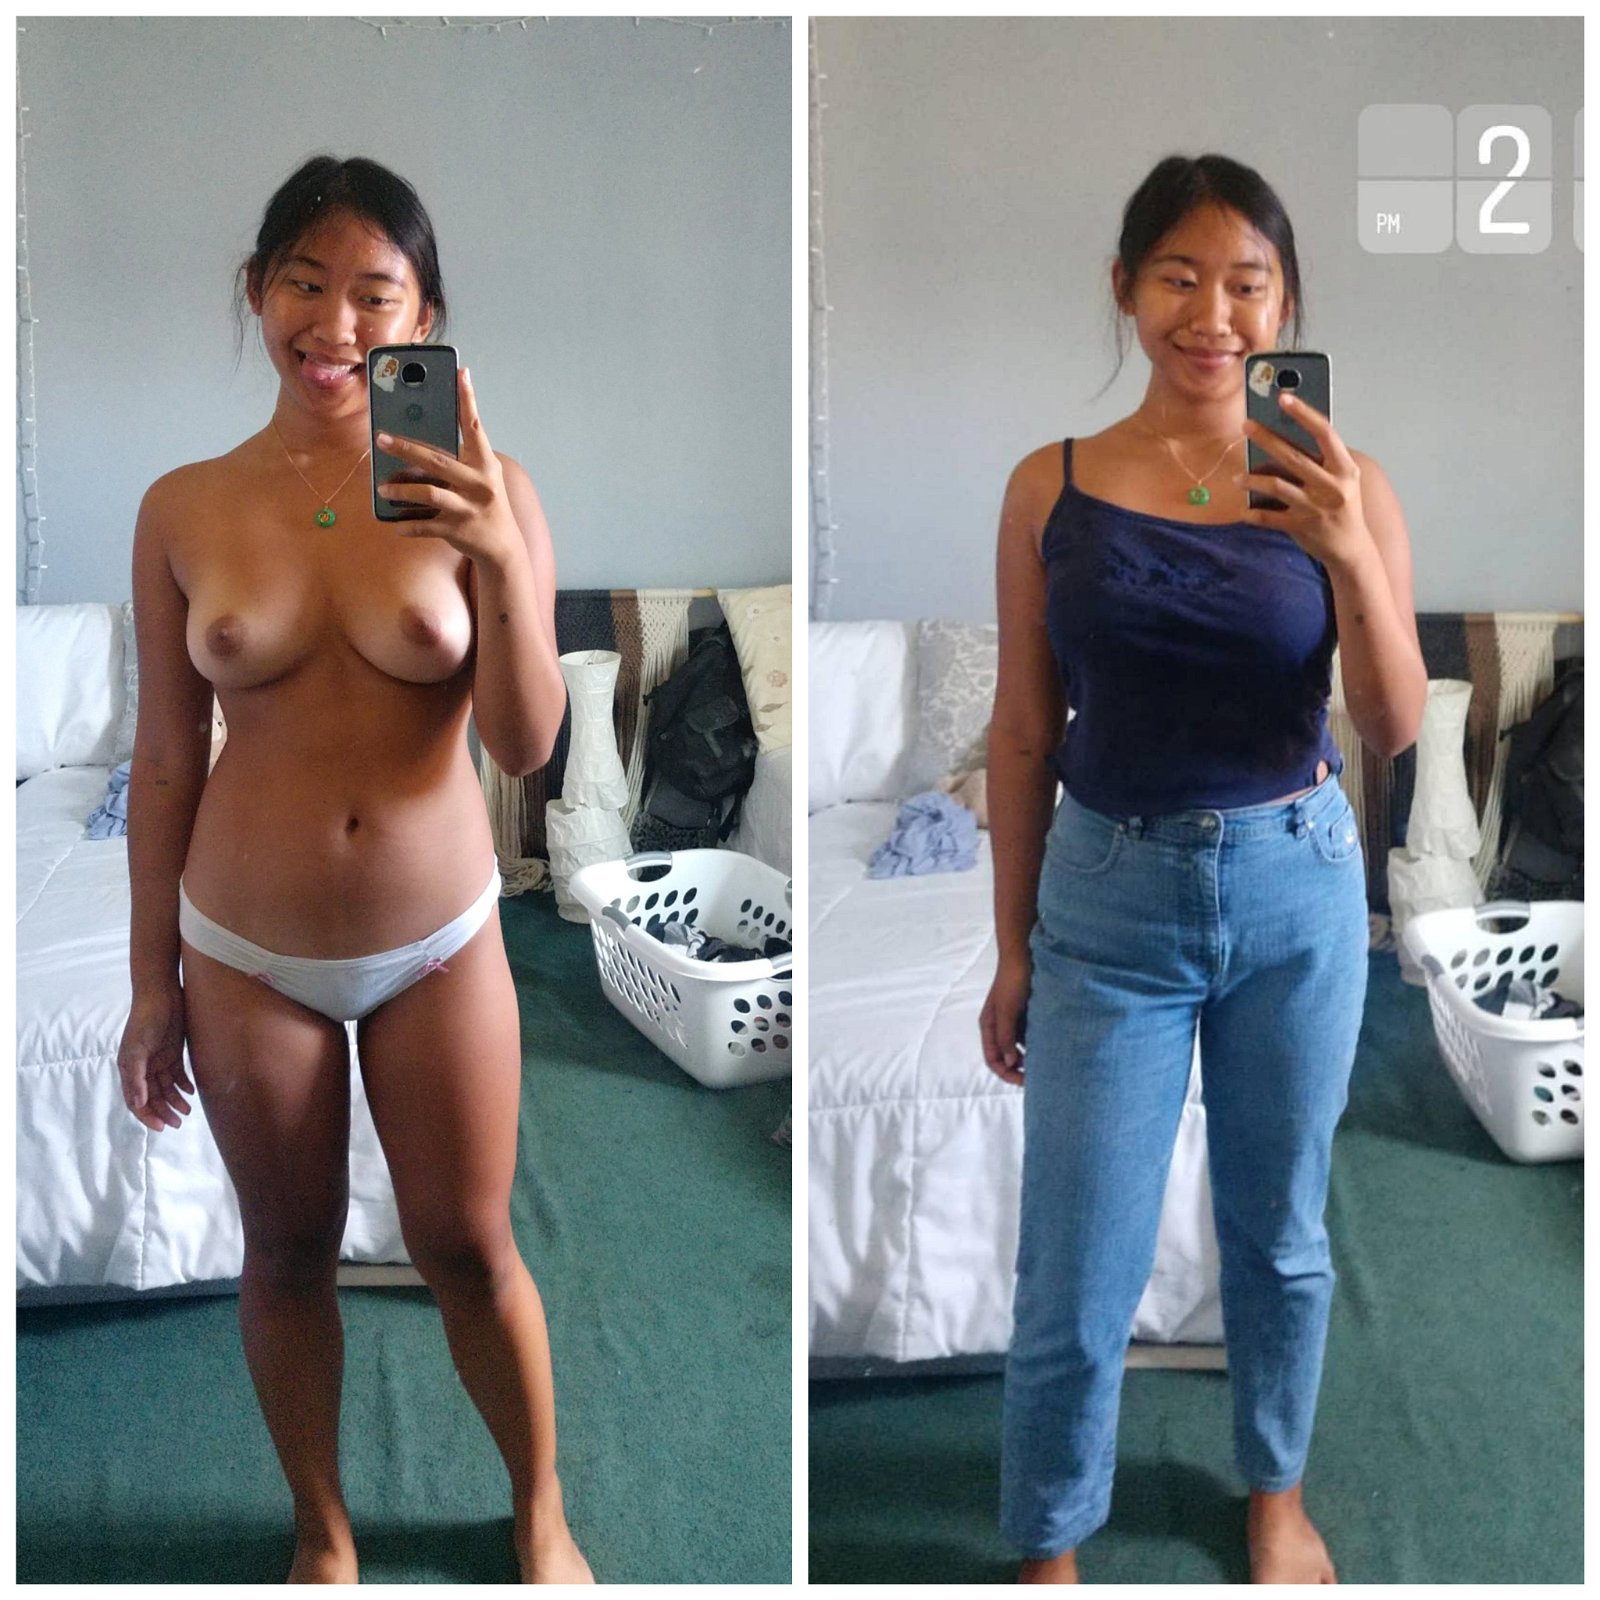 Watch the Photo by Caffiend with the username @Caffiend, posted on September 18, 2019. The post is about the topic On and Off/Before and After. and the text says '#OnAndOff #BeforeAndAfter'